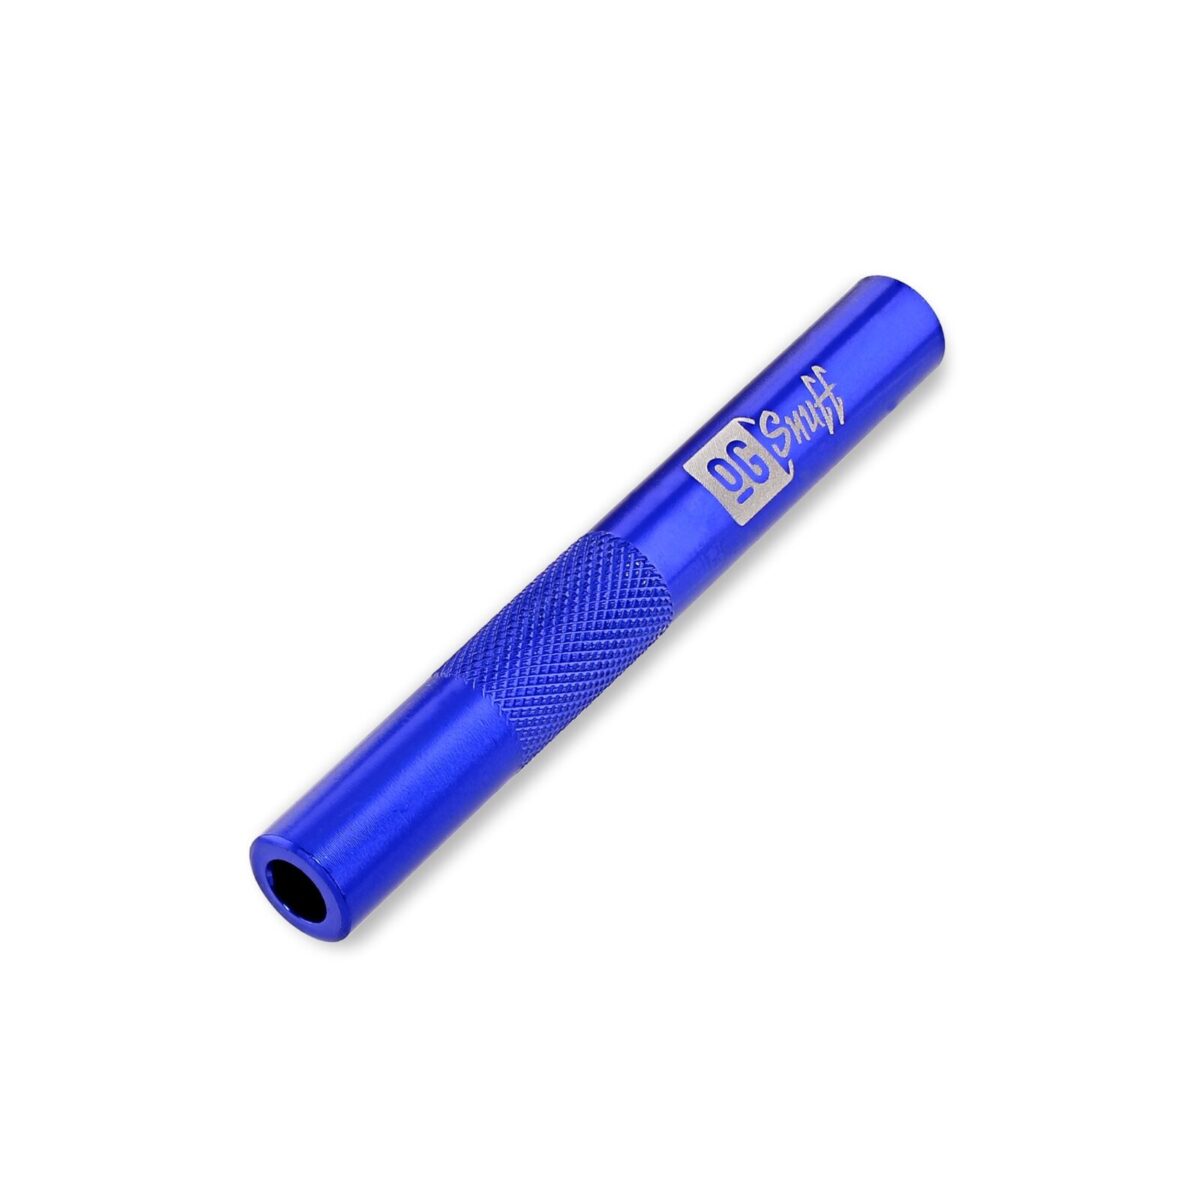 Neon blue snuff straw by OGSnuff - Innovative design for snuff enthusiasts.